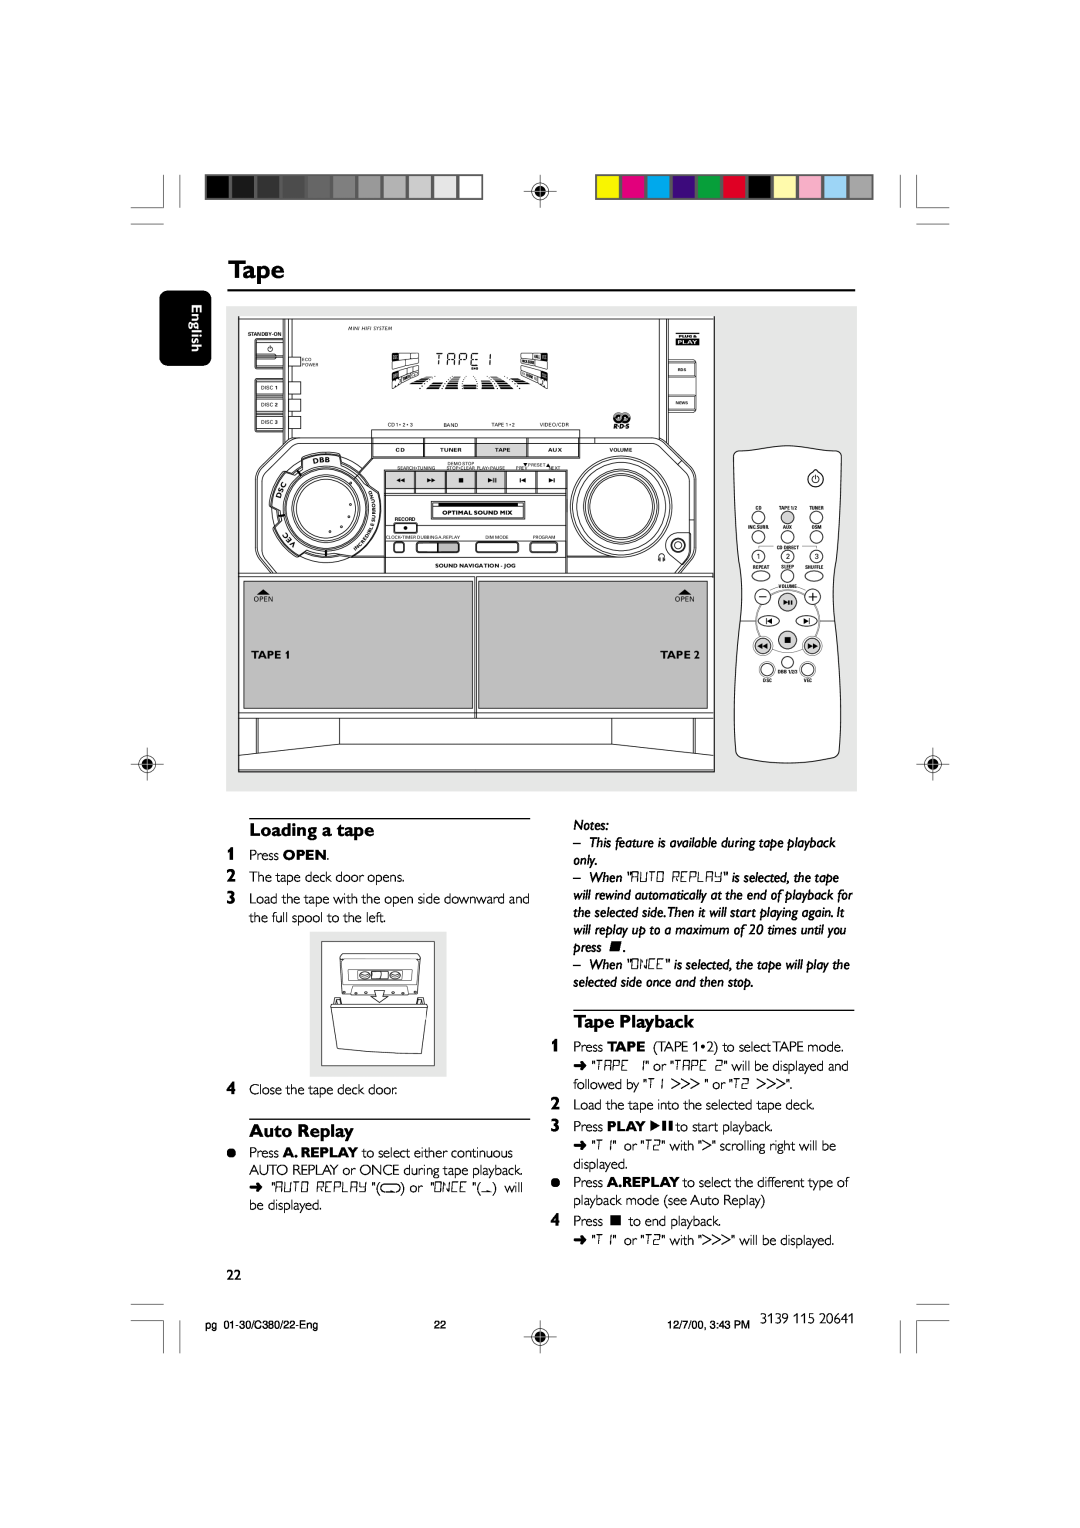 Philips FW-C380 manual Loading a tape, Auto Replay, Tape Playback 